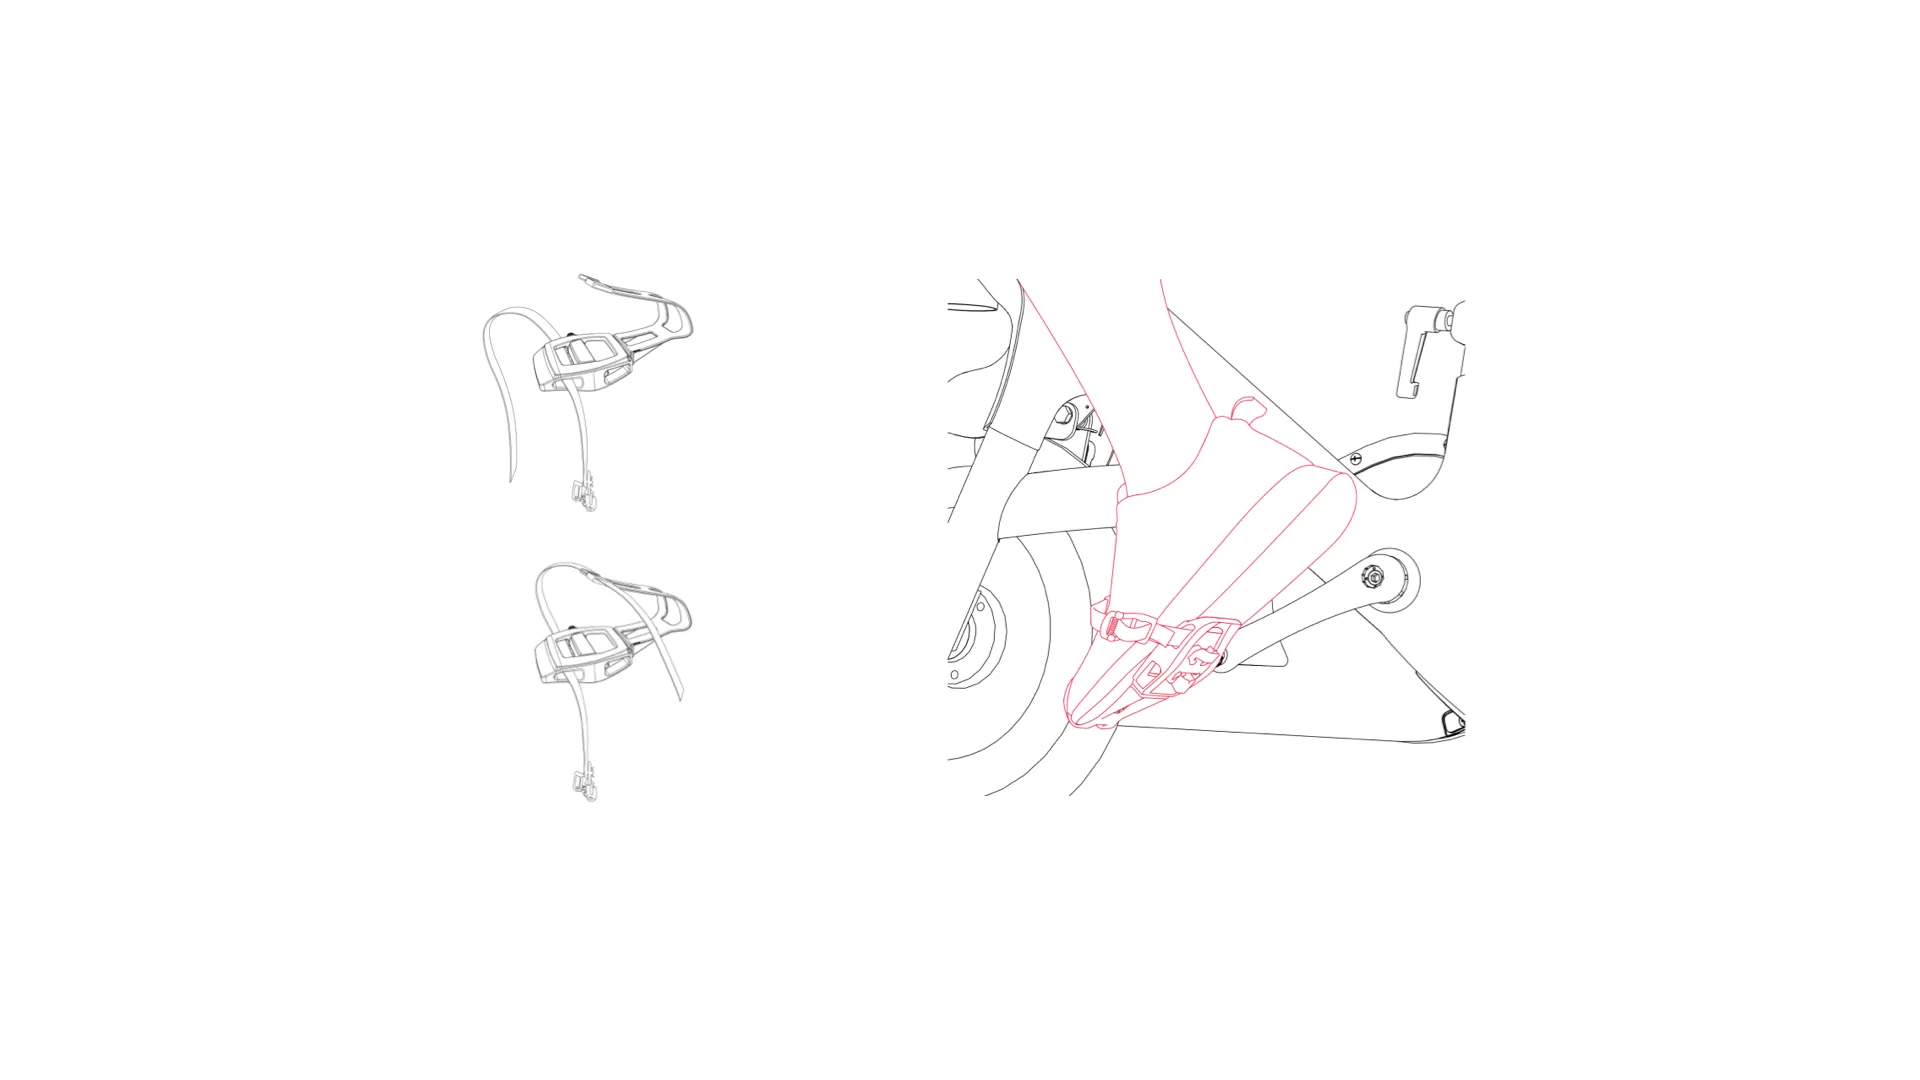 A diagram showing how to use the toe cages with a Peloton Bike